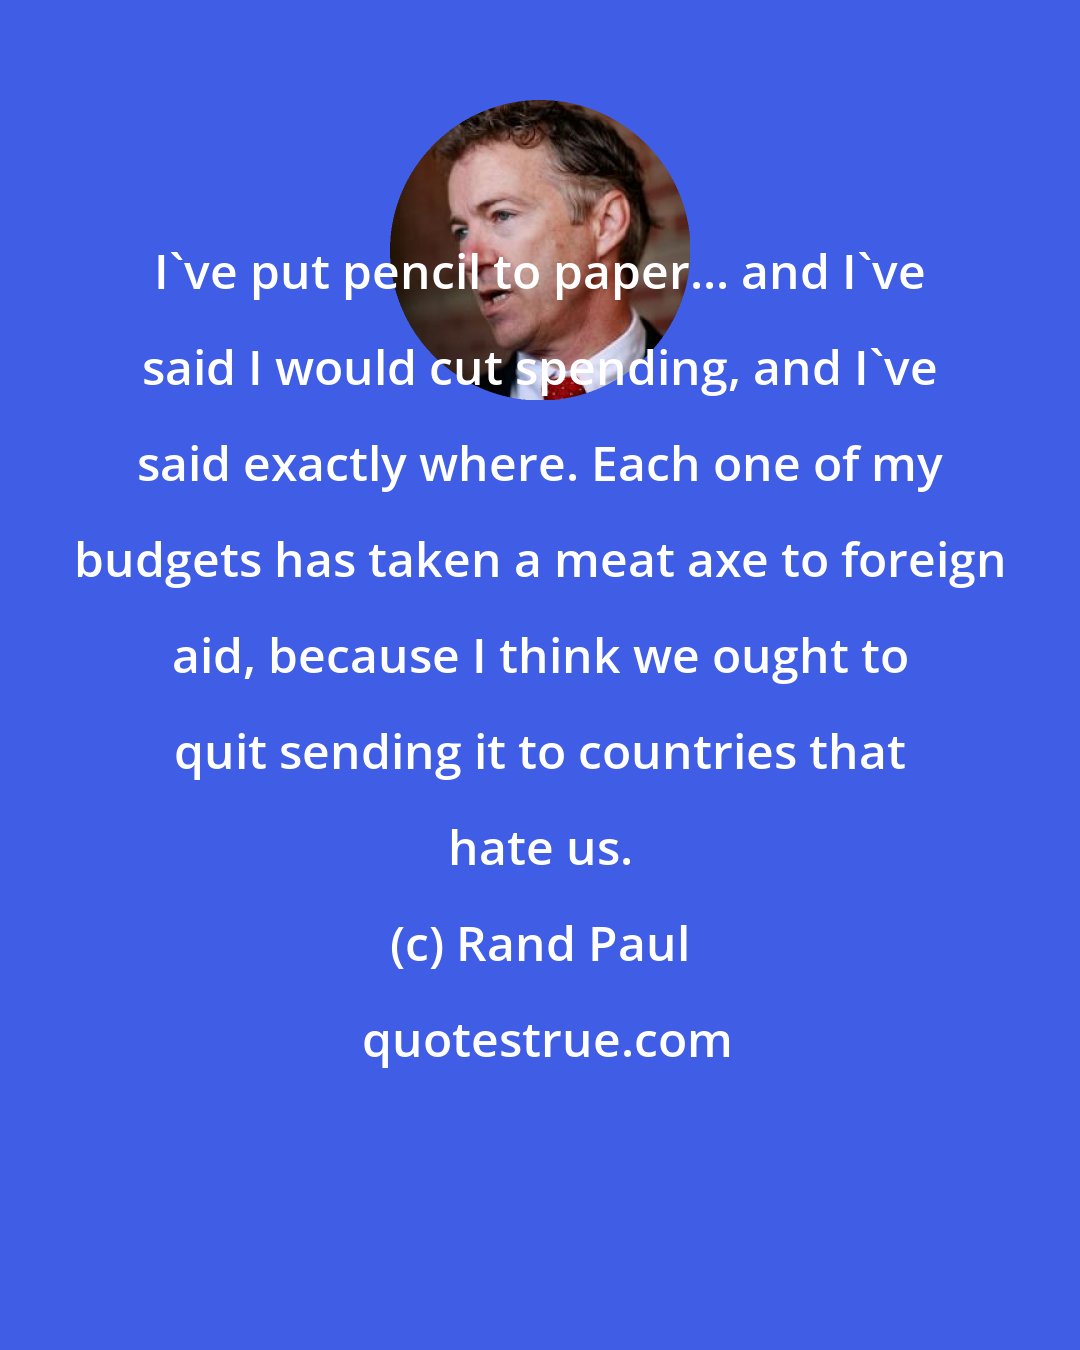 Rand Paul: I've put pencil to paper... and I've said I would cut spending, and I've said exactly where. Each one of my budgets has taken a meat axe to foreign aid, because I think we ought to quit sending it to countries that hate us.